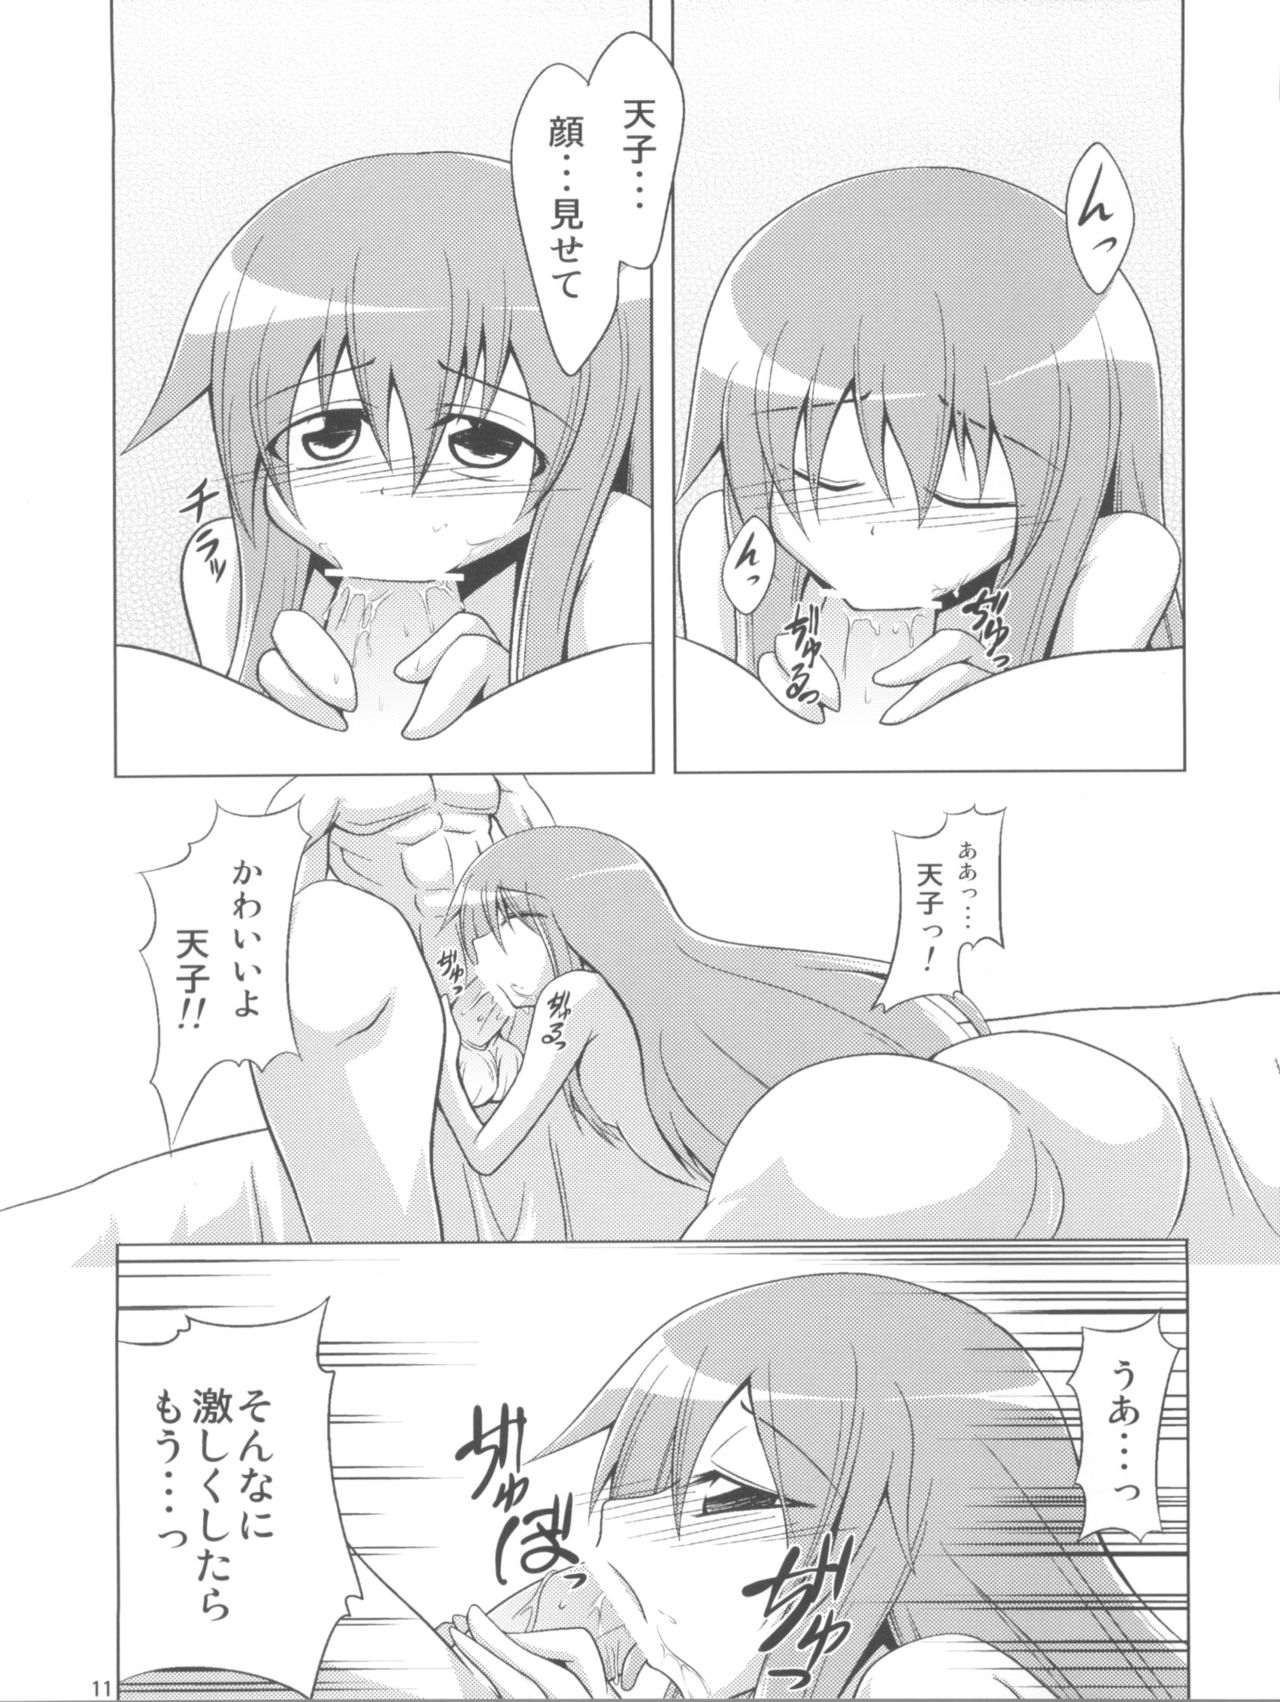 (COMIC1☆4) [Forever and ever... (Eisen)] Half Love Tenshi (Touhou Project) (COMIC1☆4) [Forever and ever... (英戦)] Half Love 天子 (東方Project)